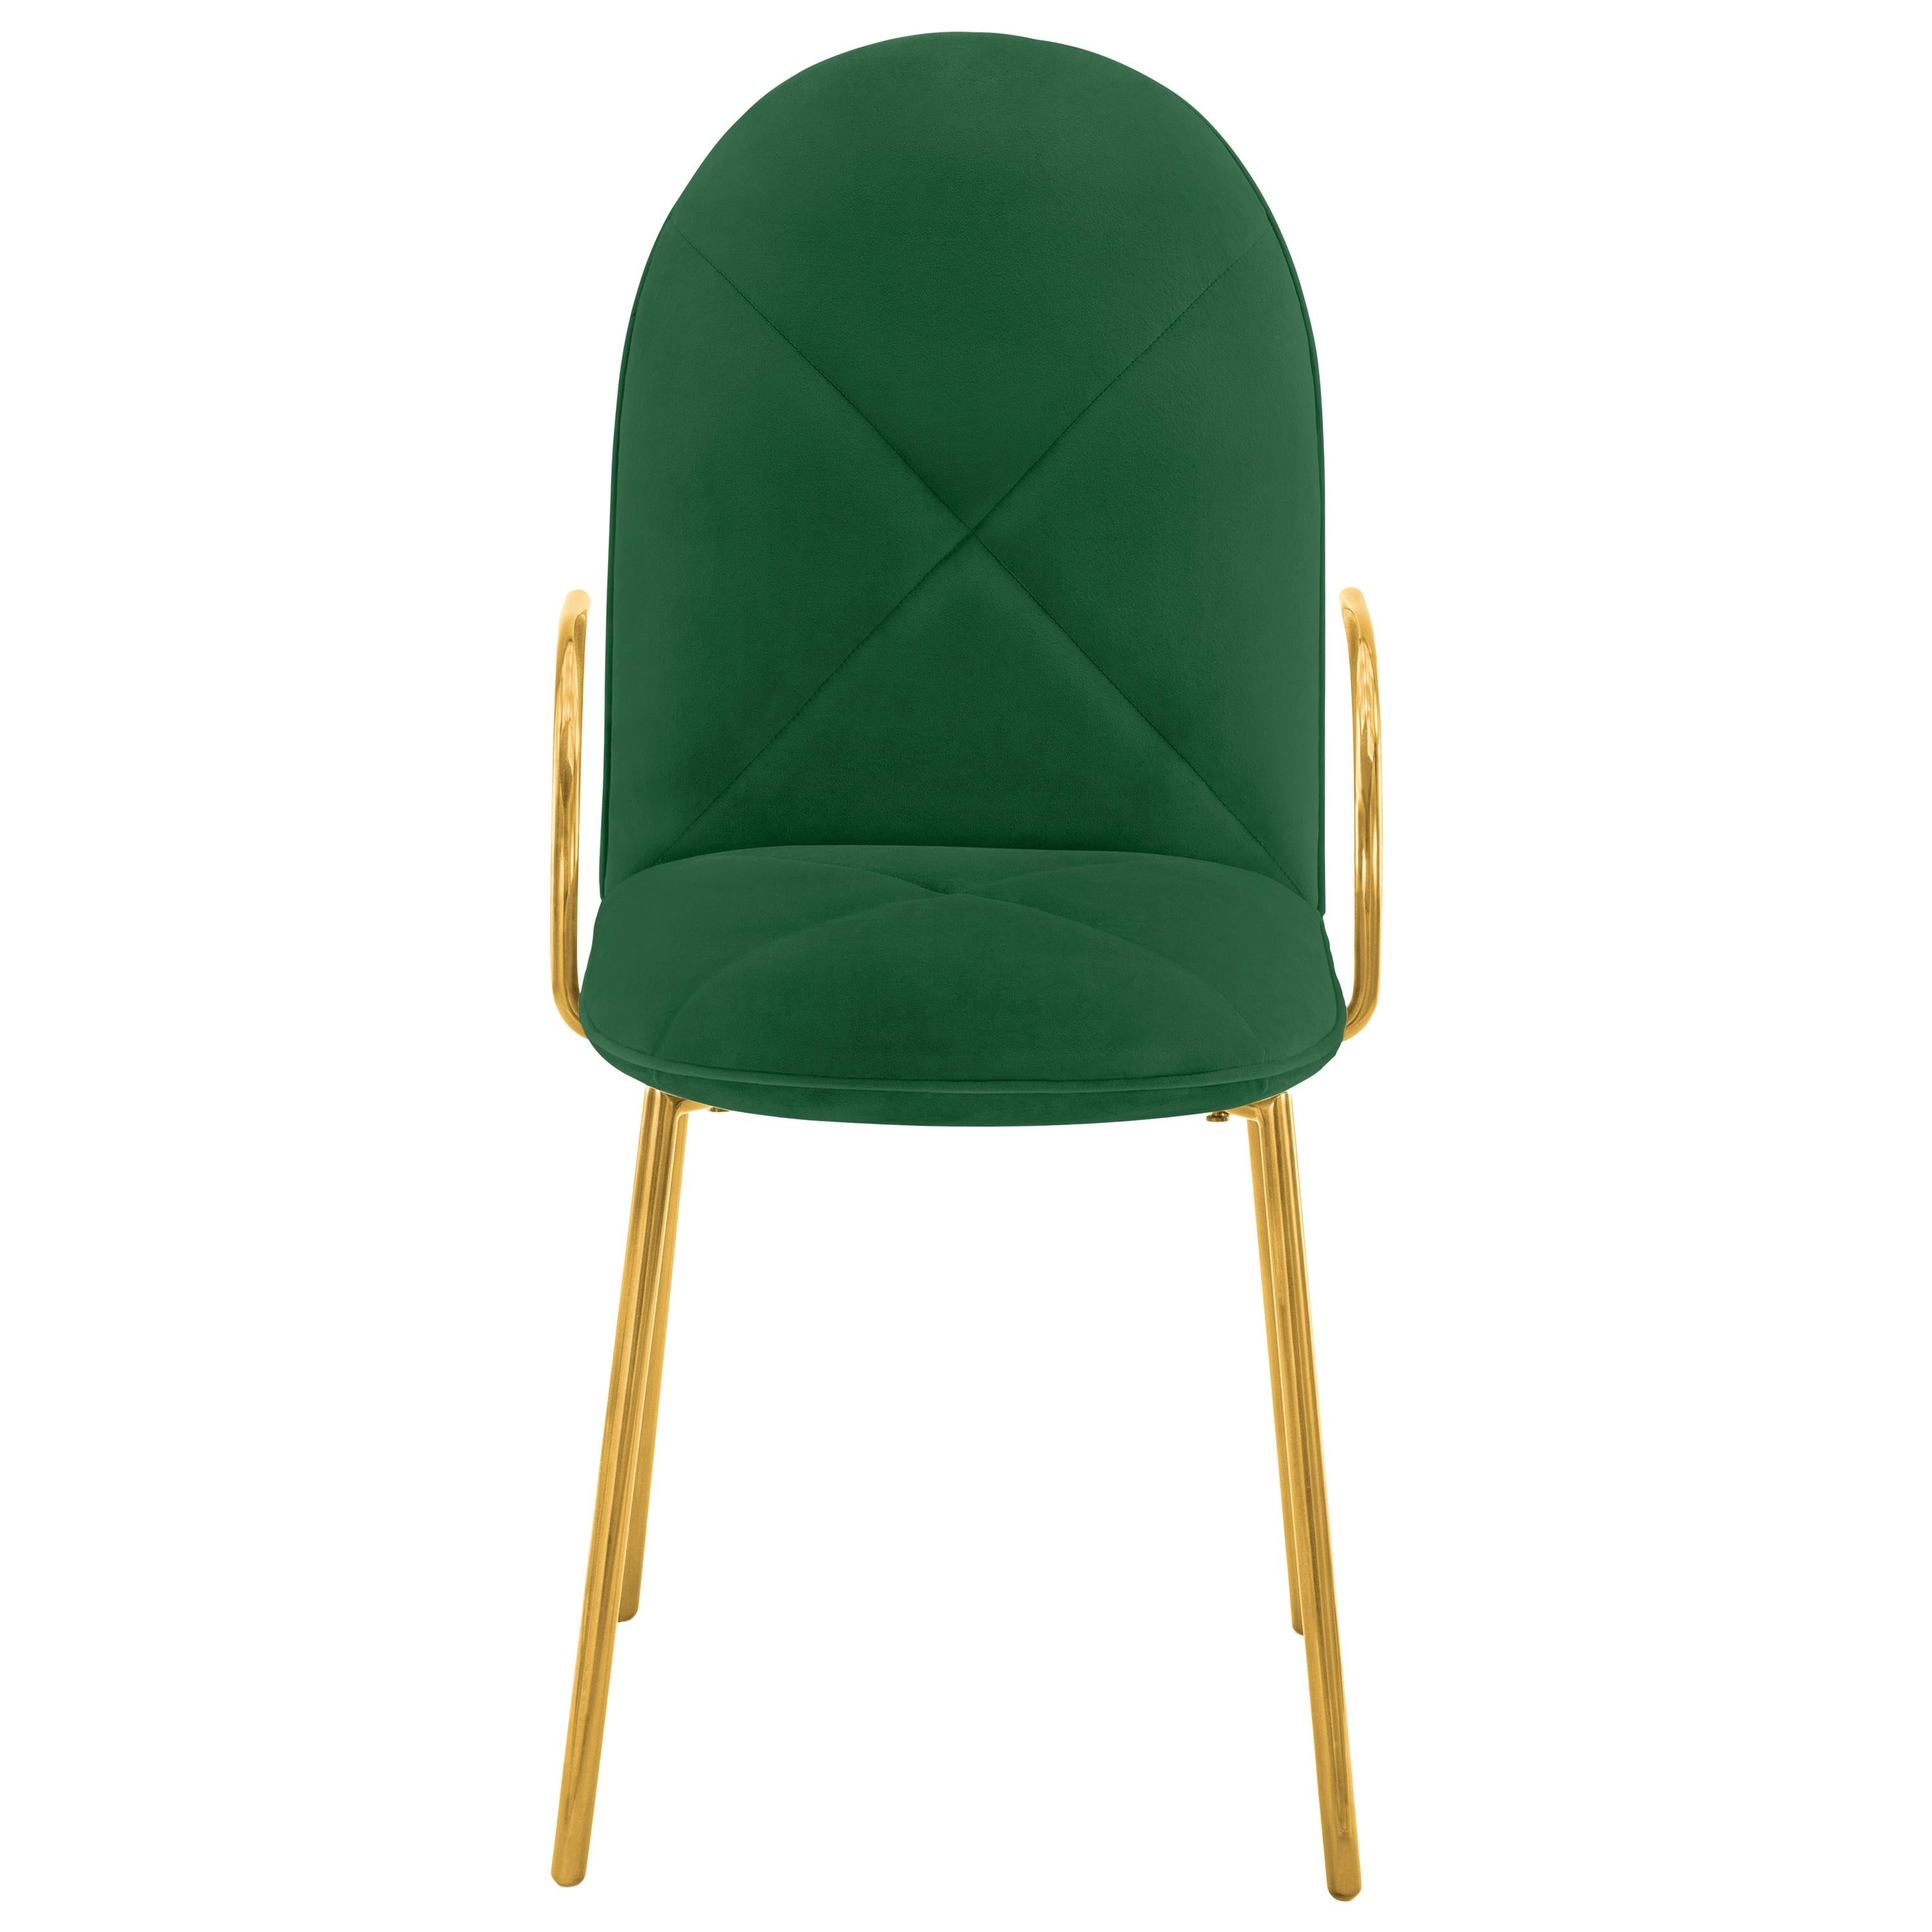 Orion Dining Chair with Plush Green Velvet and Gold Arms by Nika Zupanc